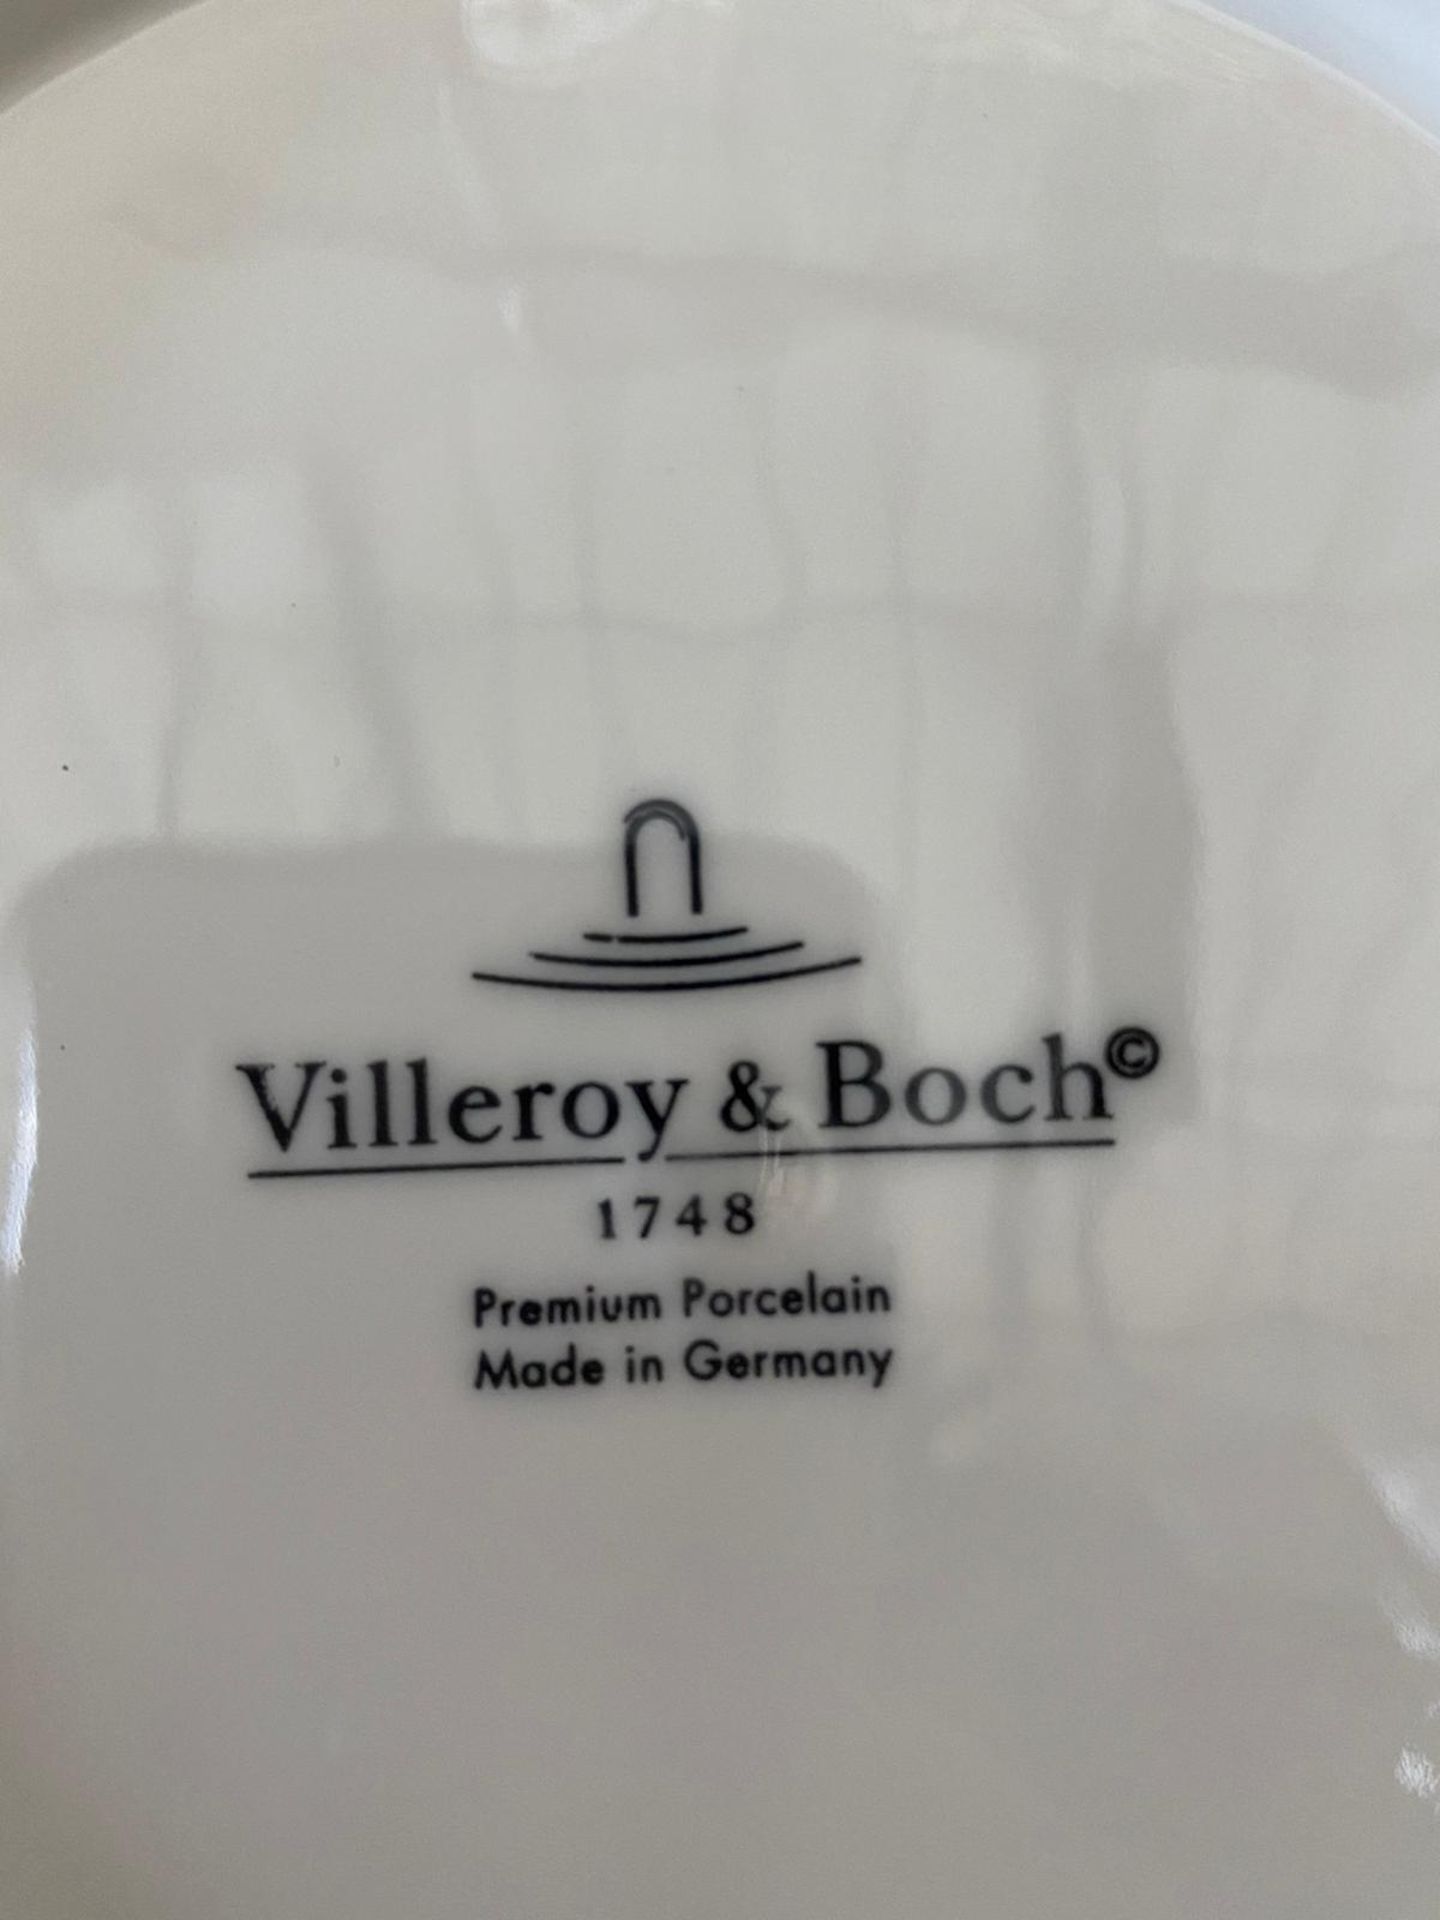 6 x Villeroy & Boch Royal Dinner Plate - 290mm (29cm)- Ref: 1044122620 -New and Boxed - RRP: £125 - Image 3 of 5